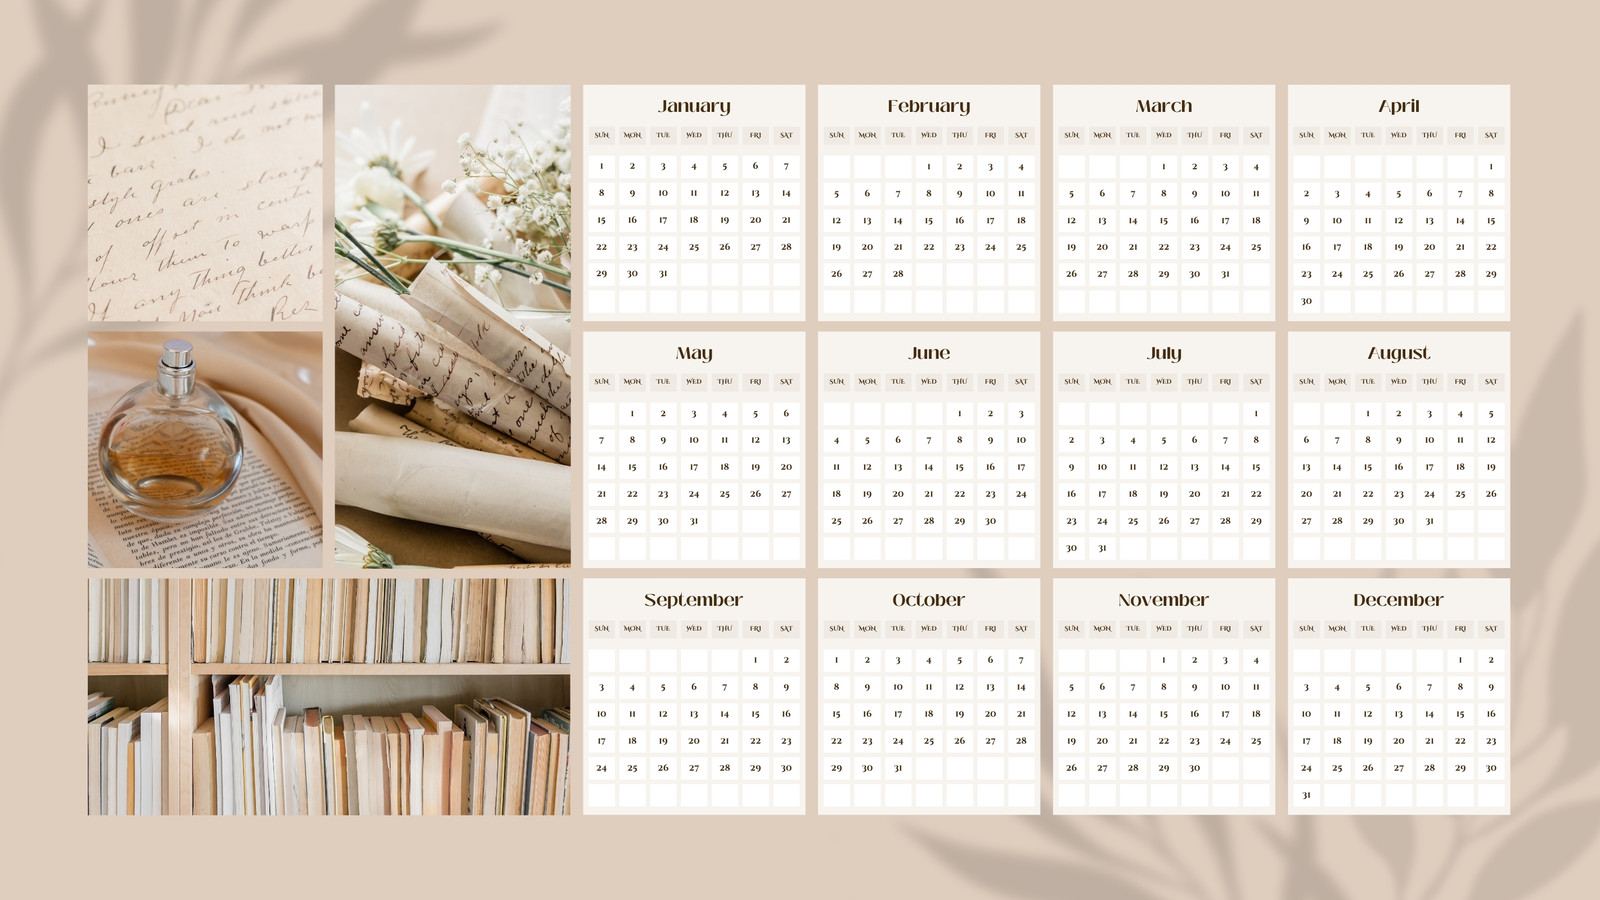 Beige Vintage Books and Papers Photo Calendar